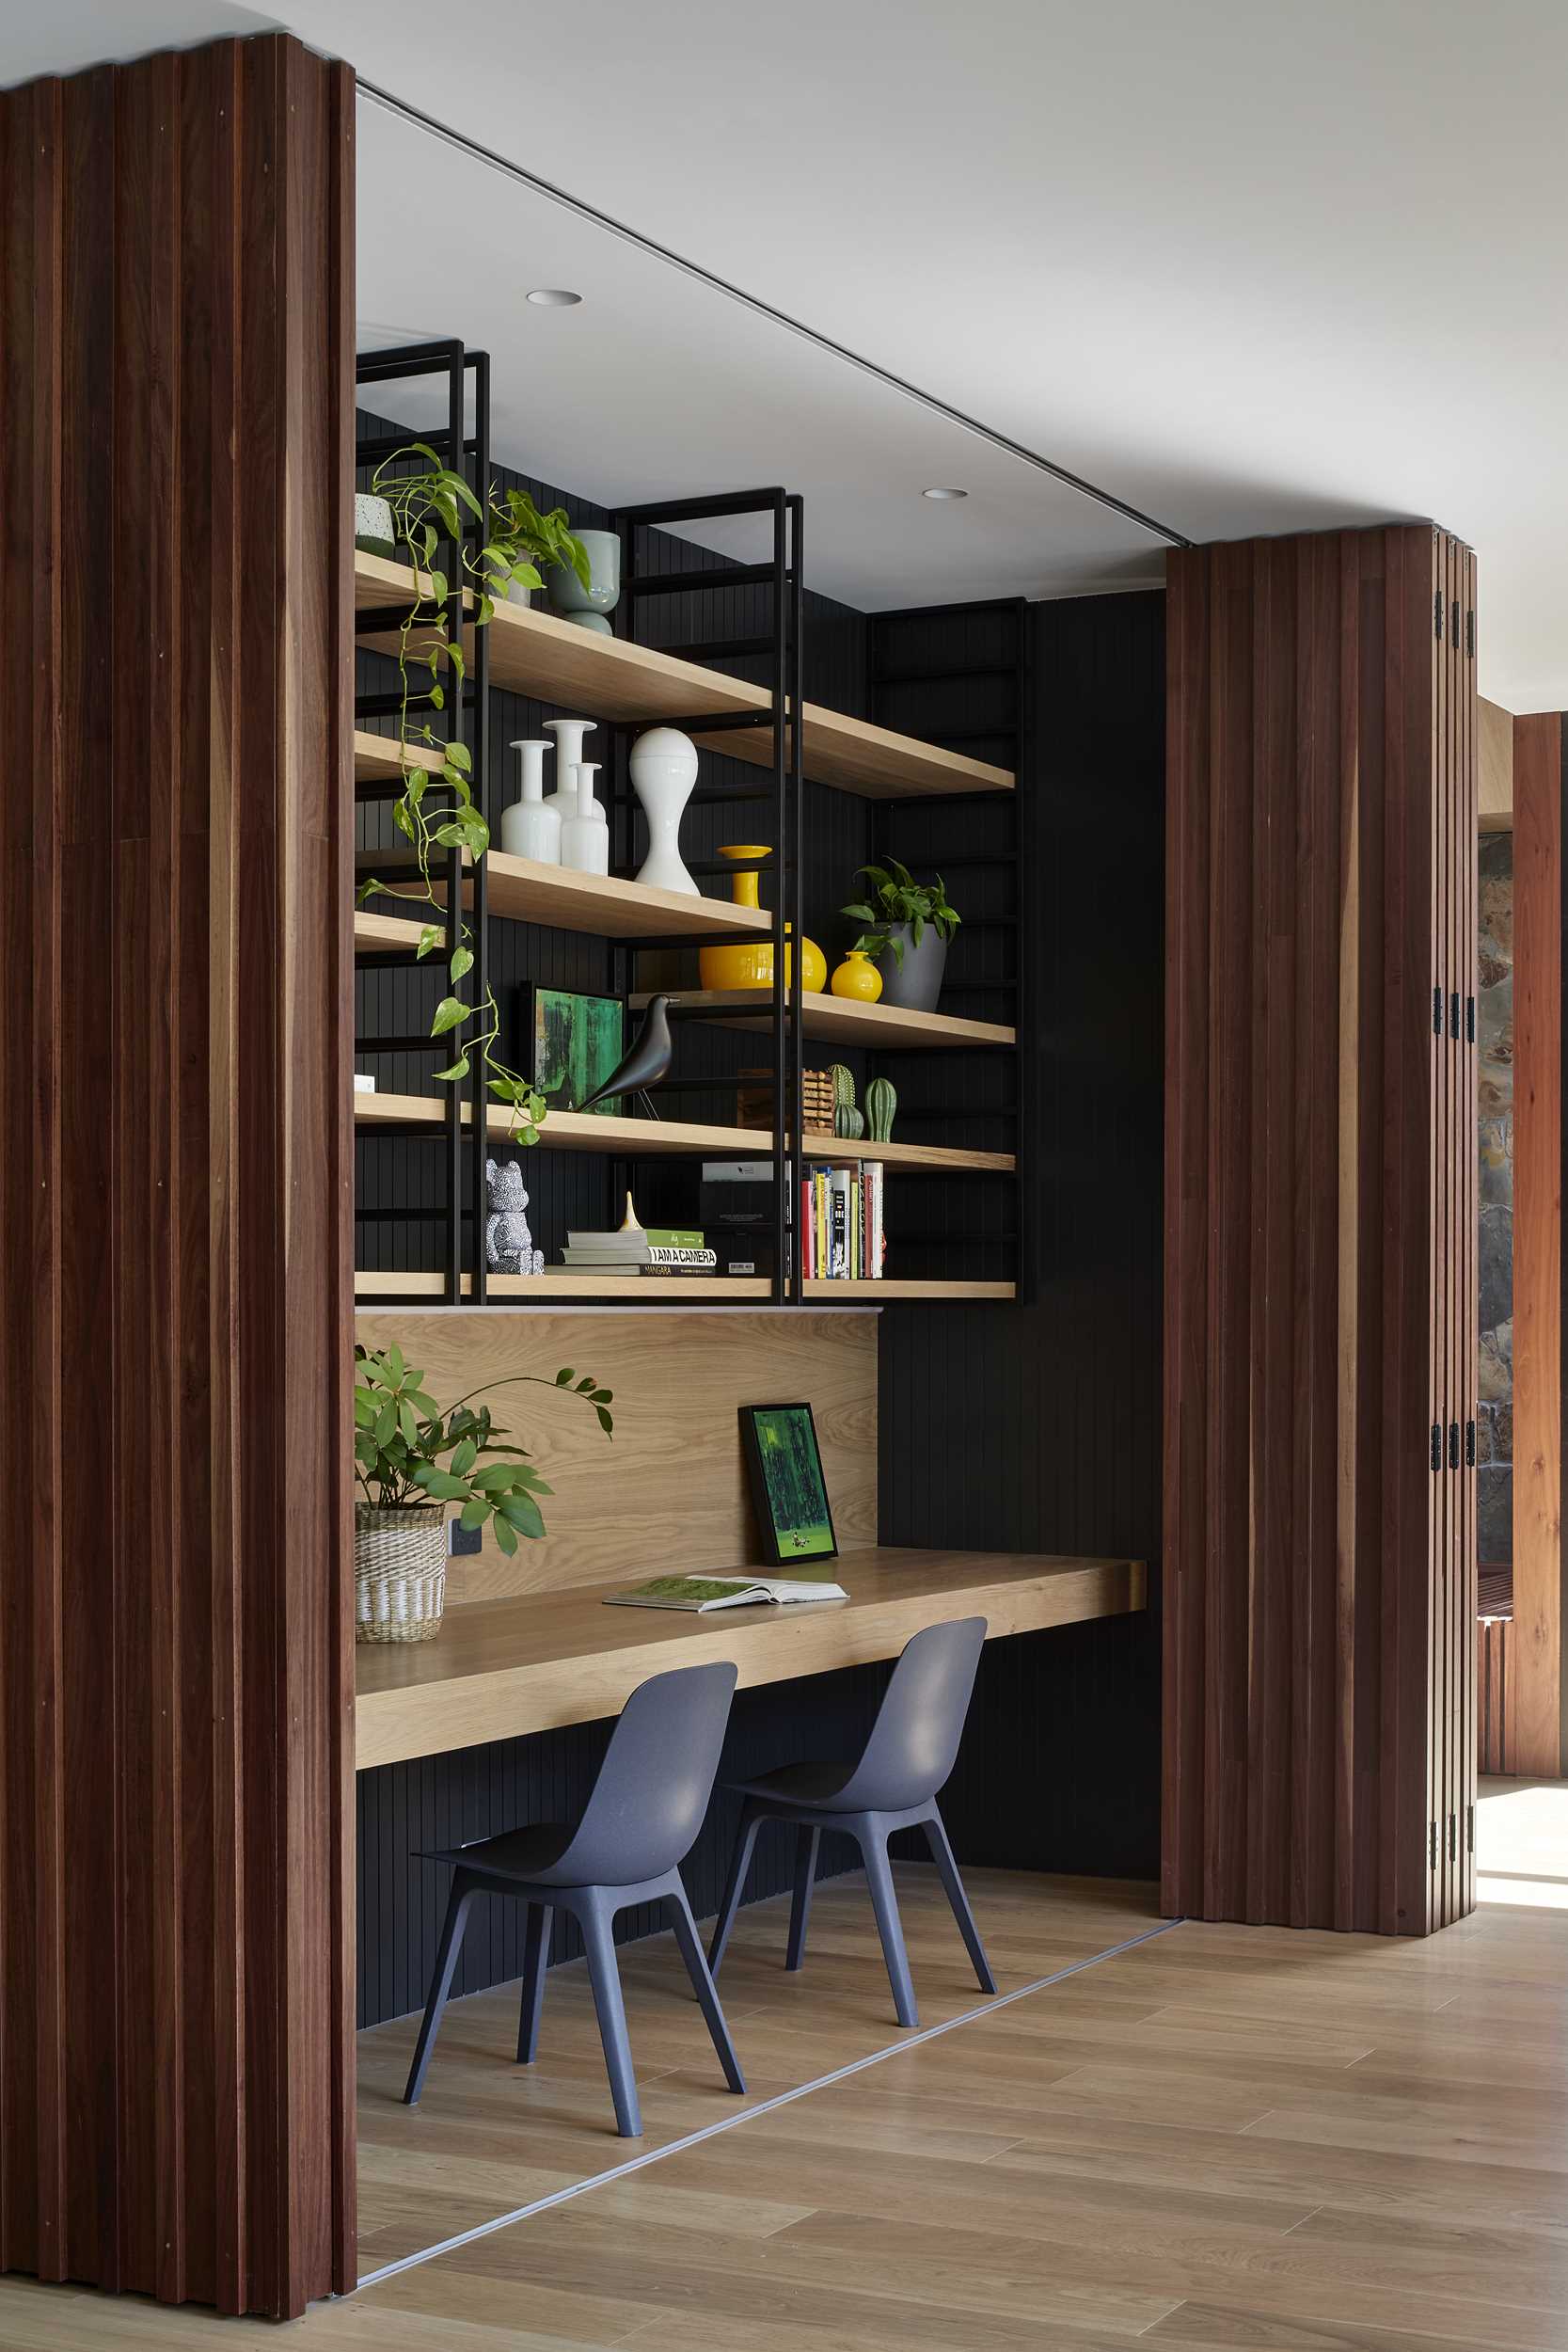 A modern ،me interior includes a wood accent wall that opens to reveal a hidden office for two.